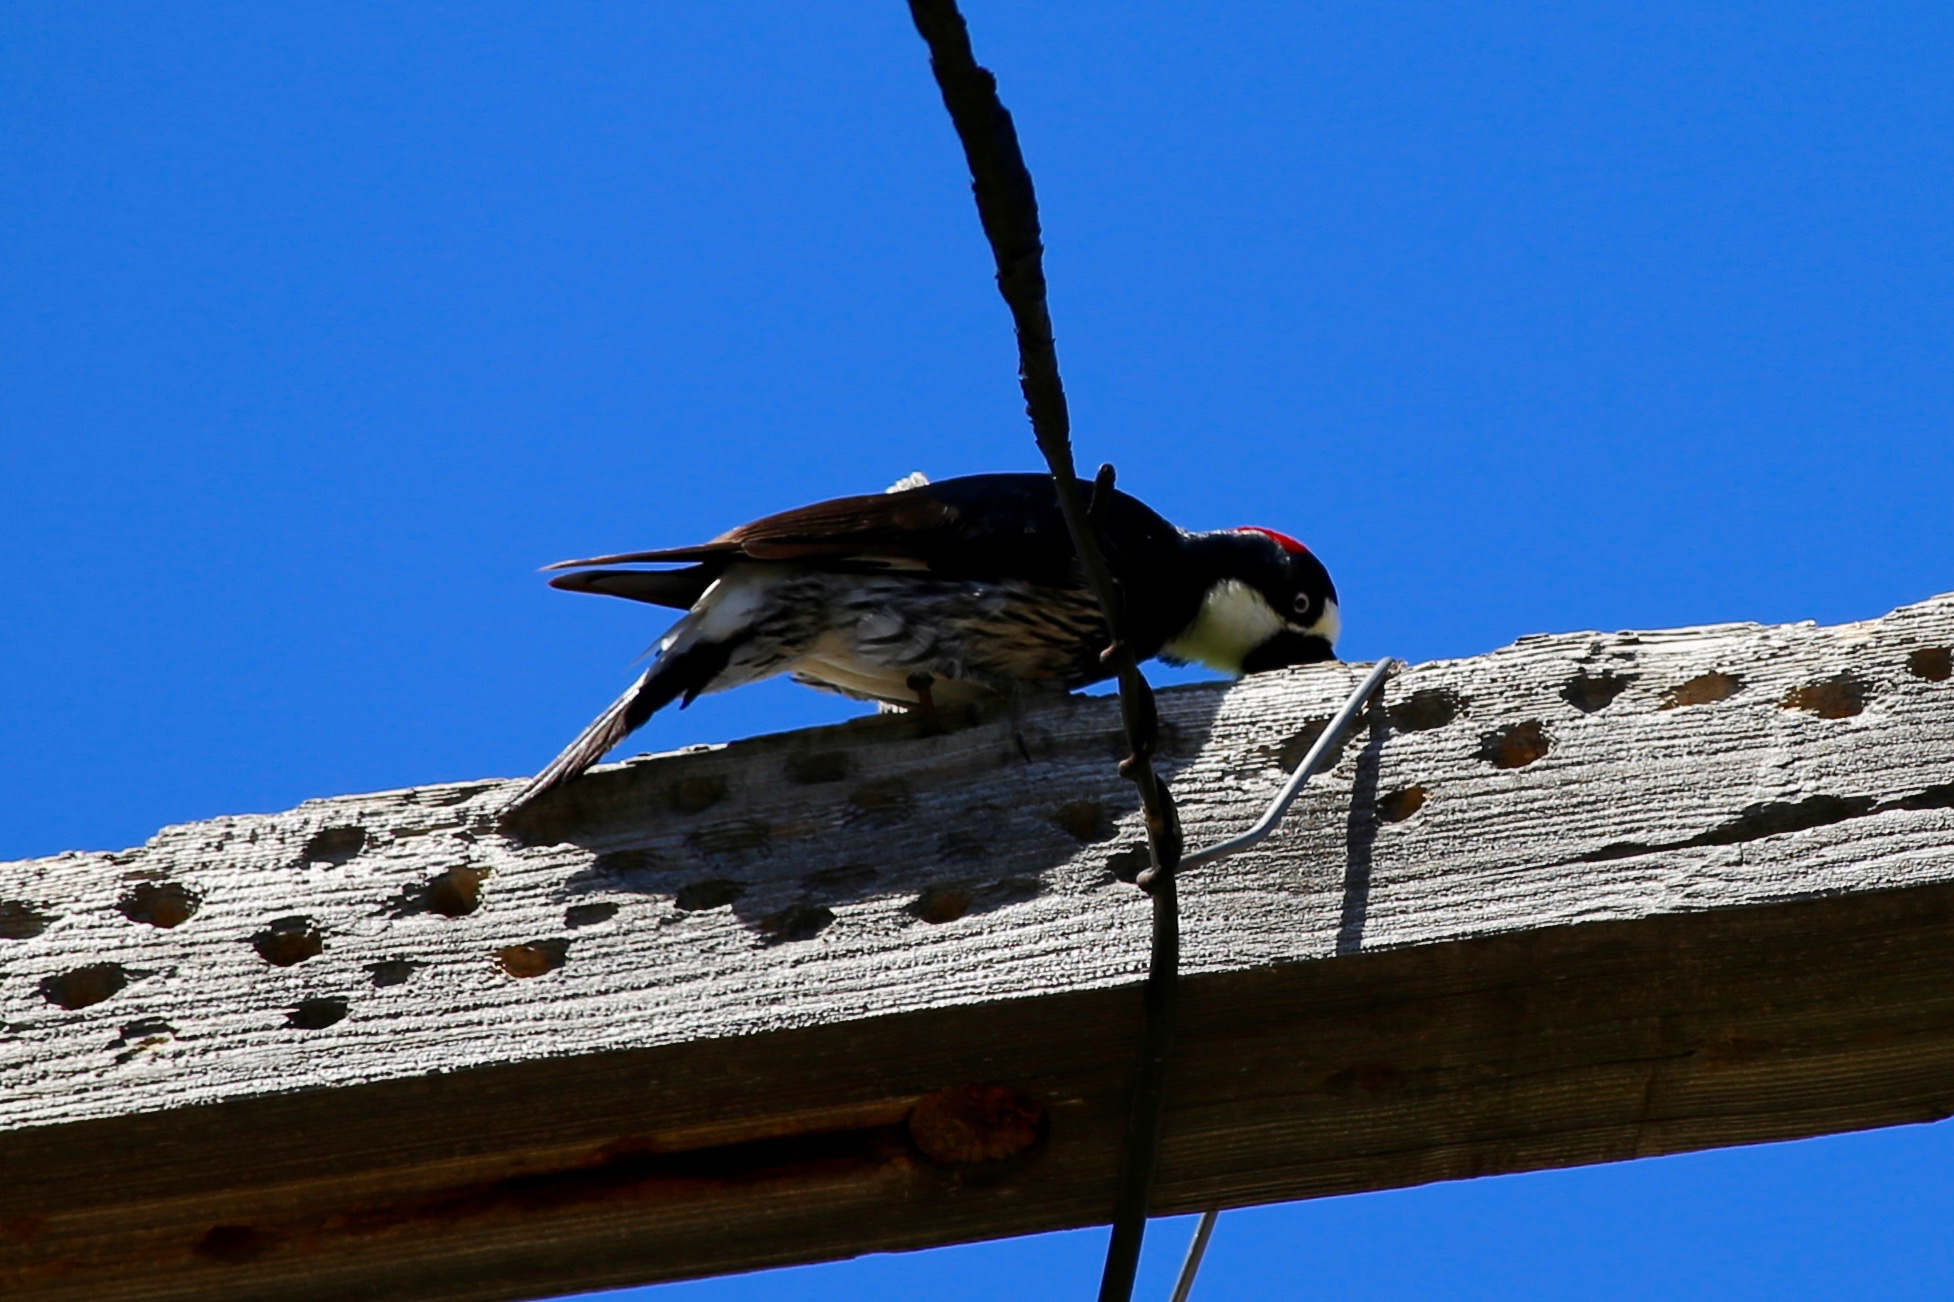 A woodpecker pecks at a wooden plank that already has rows of quarter-sized holes create by the bird's pecking.